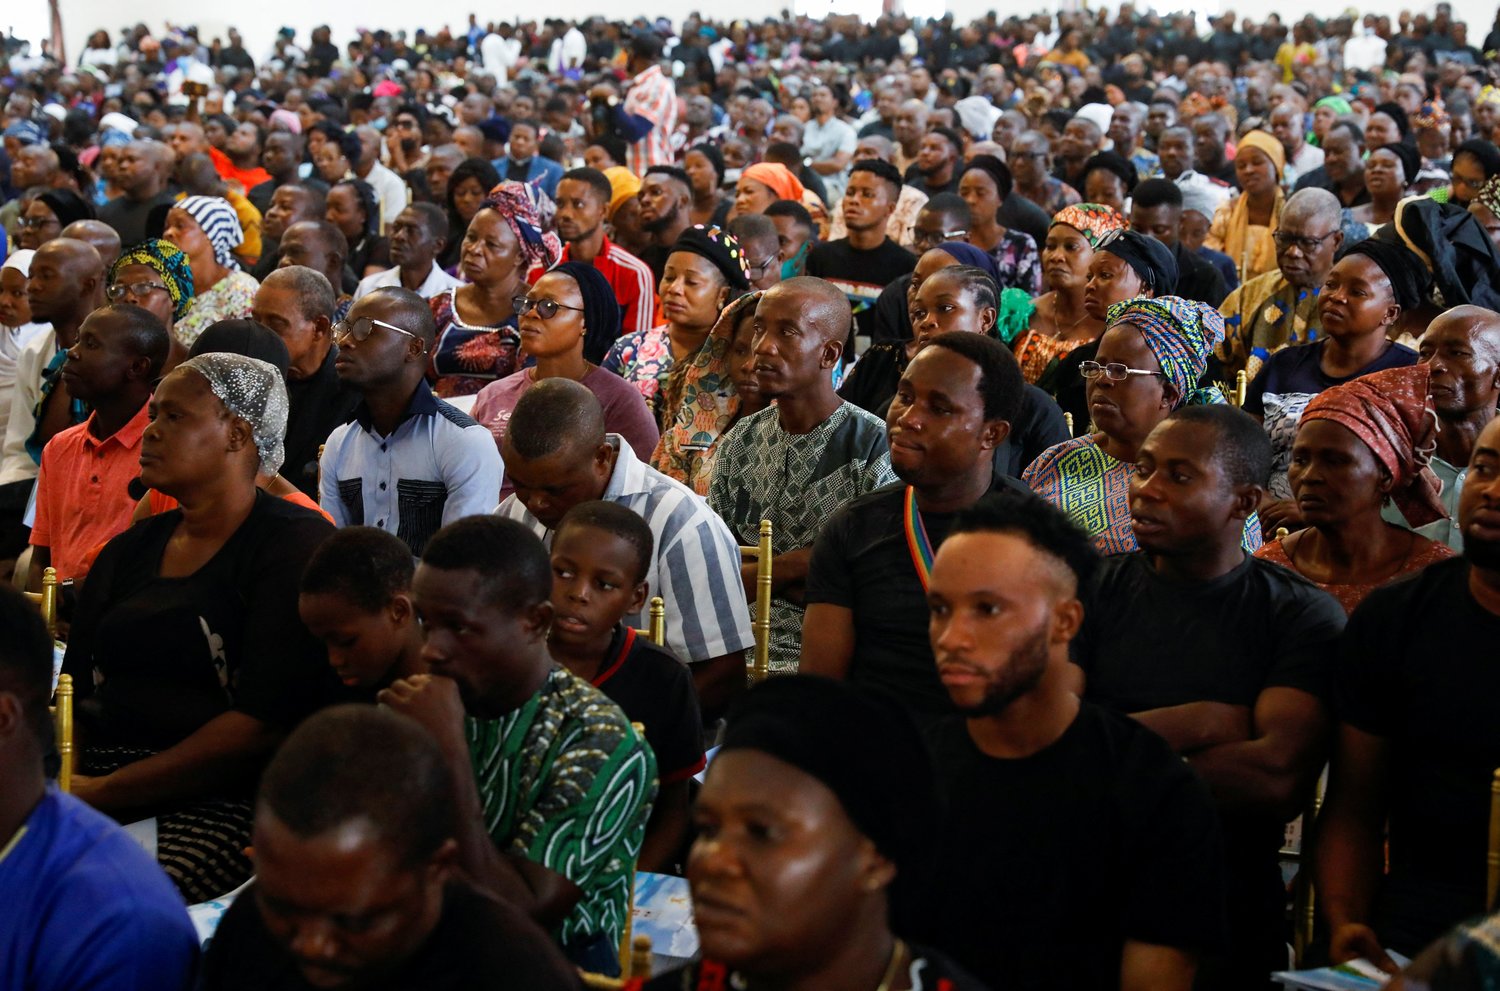 Hundreds attend a Funeral Mass in the parish hall of St. Francis Xavier Church in Owo, Nigeria, June 17.